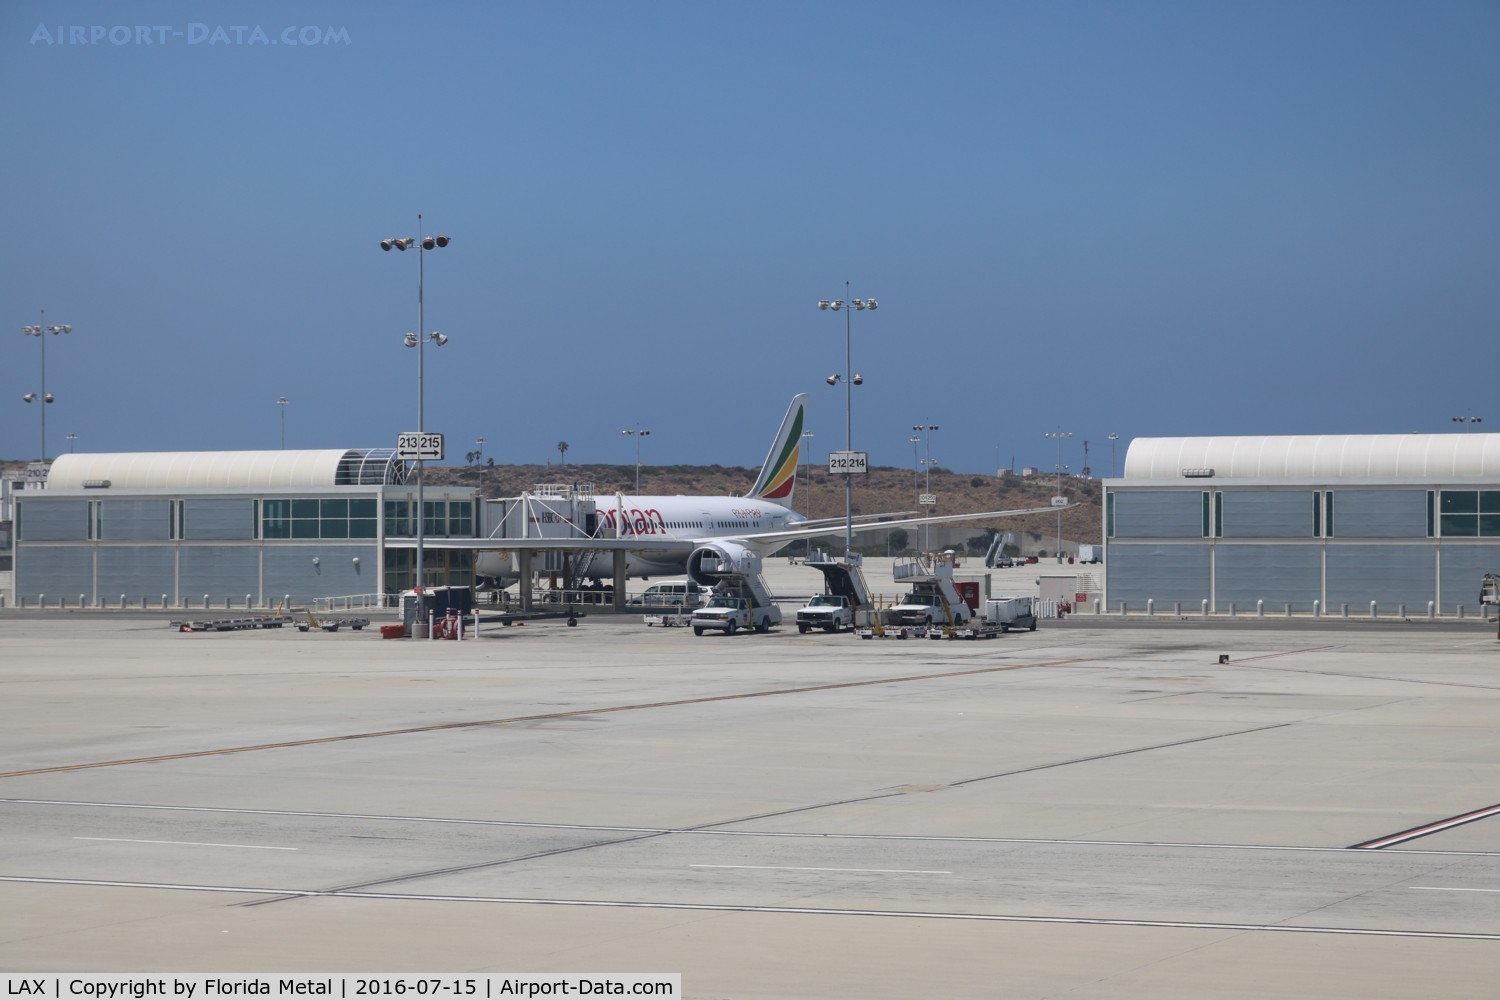 Los Angeles International Airport (LAX) - Remote parking with Ethiopian 787